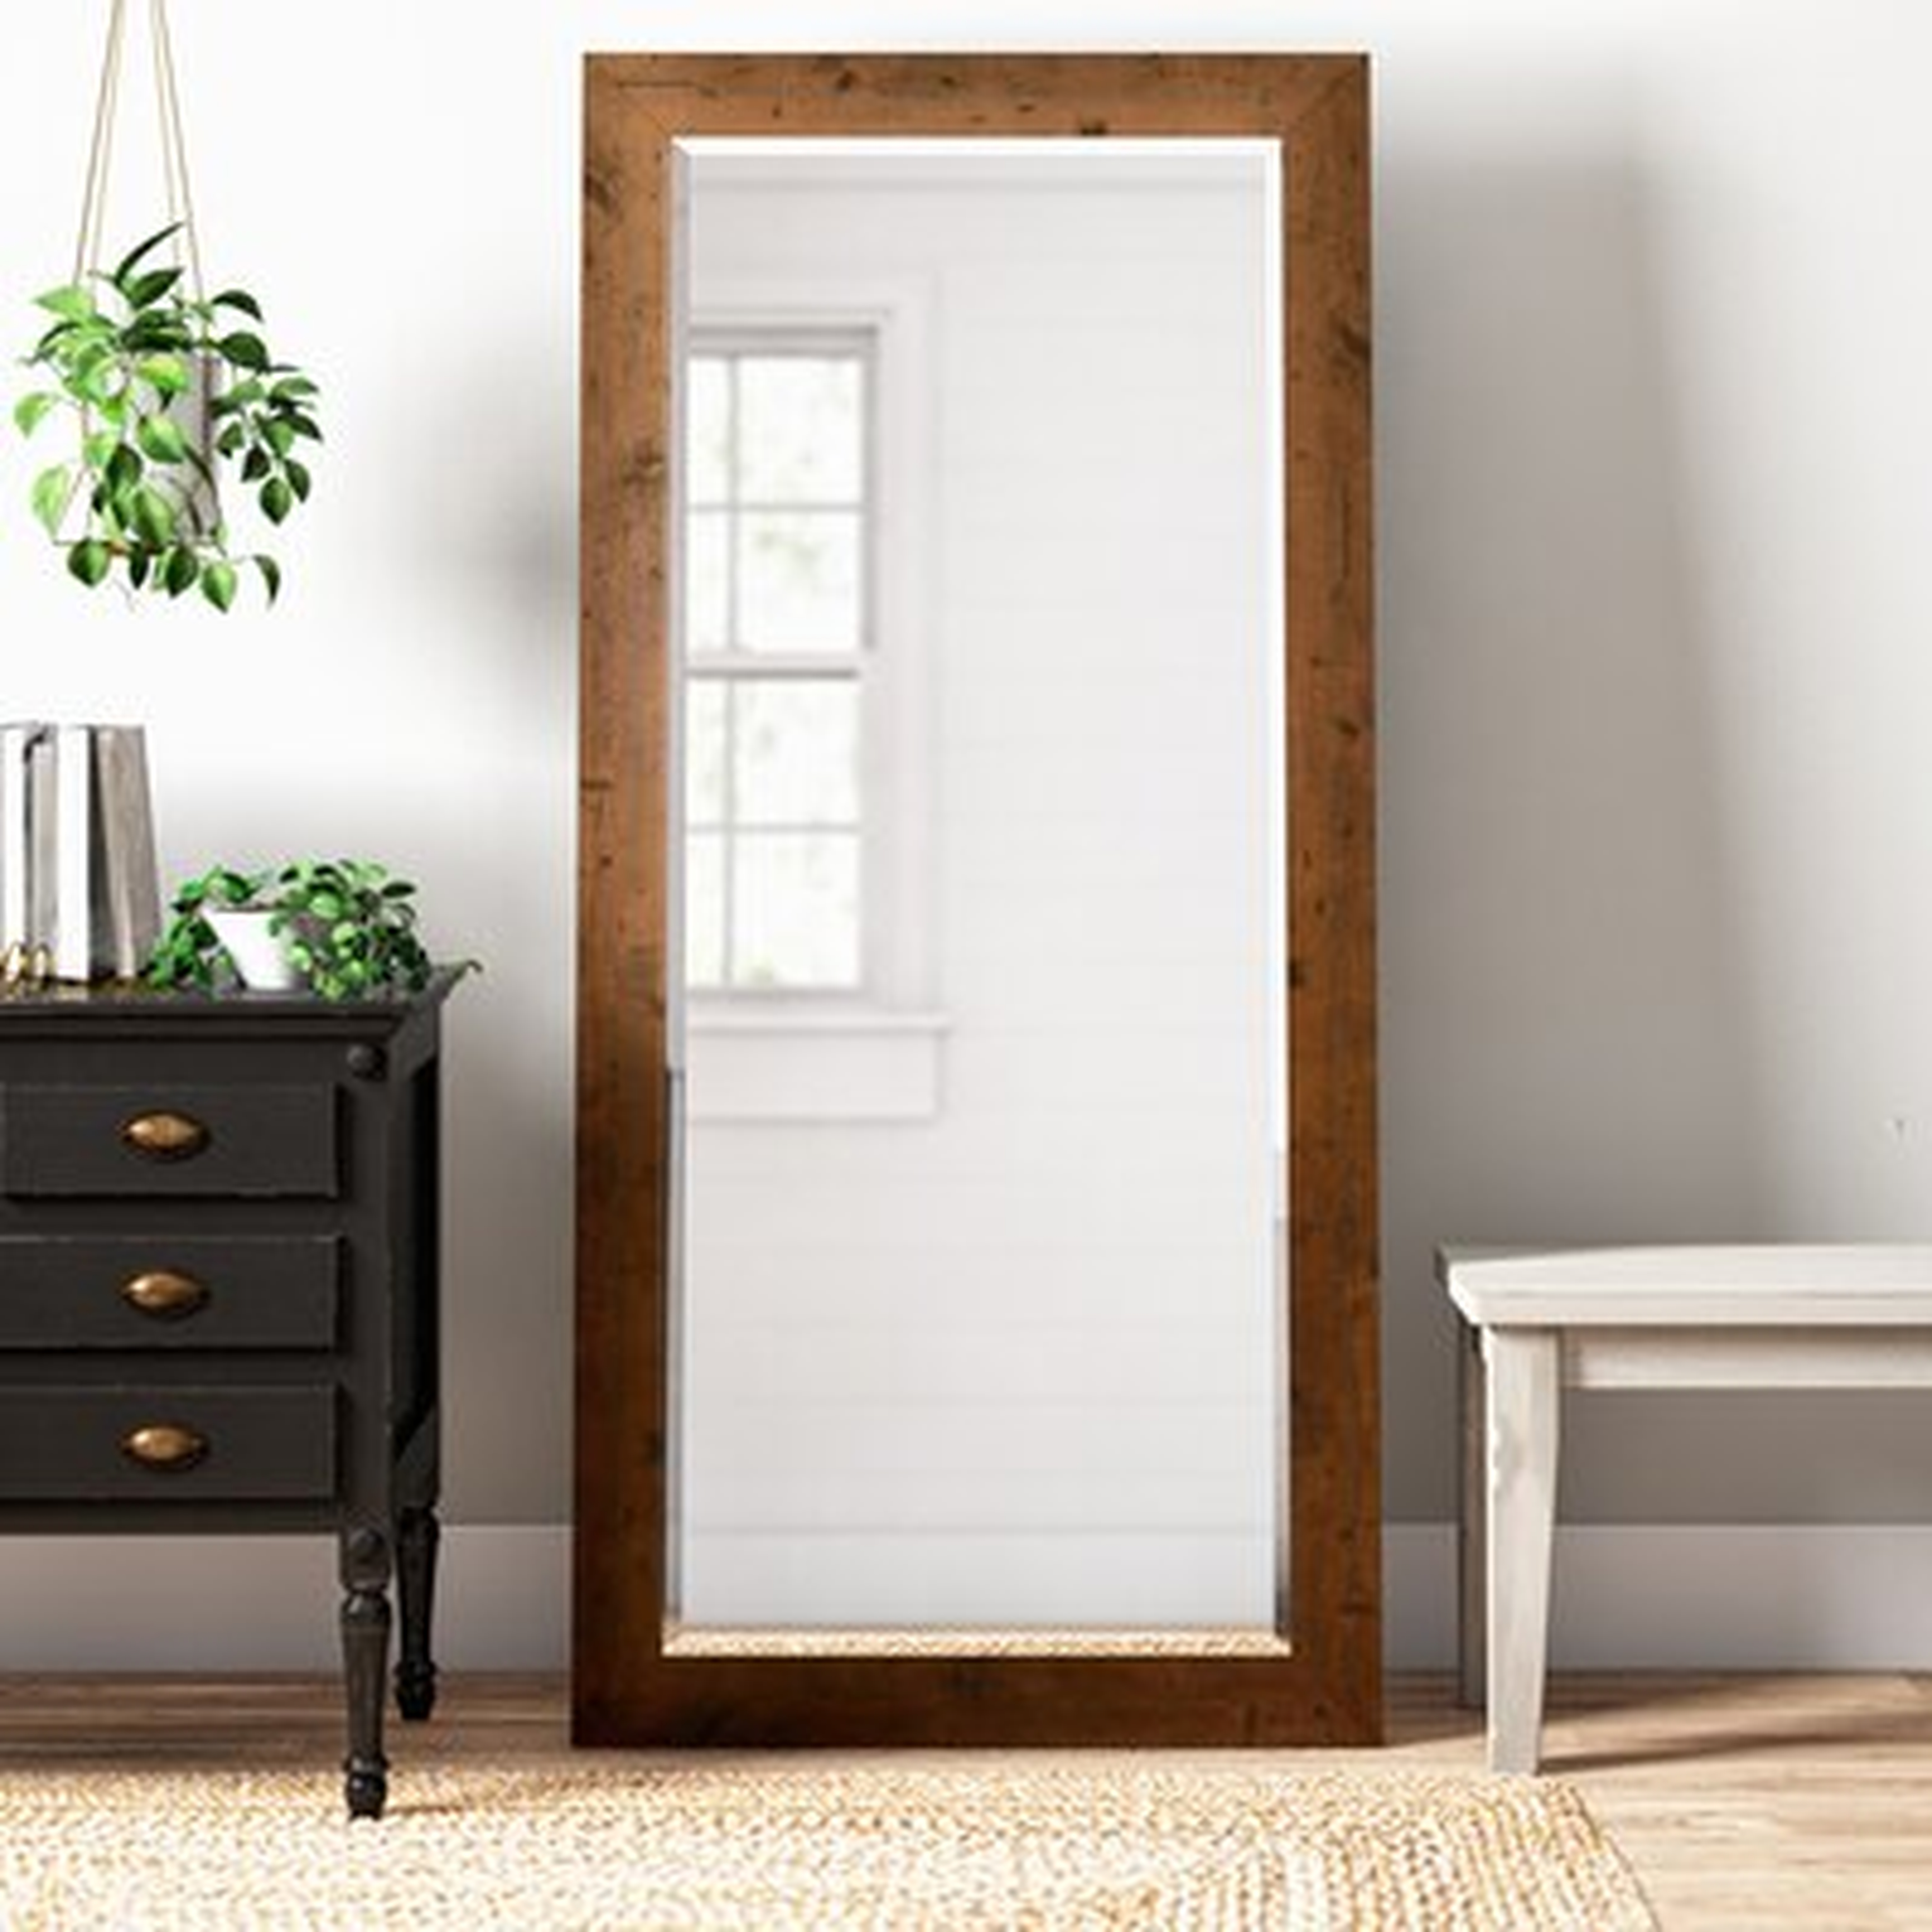 Pineview Traditional Wall Mirror - Birch Lane